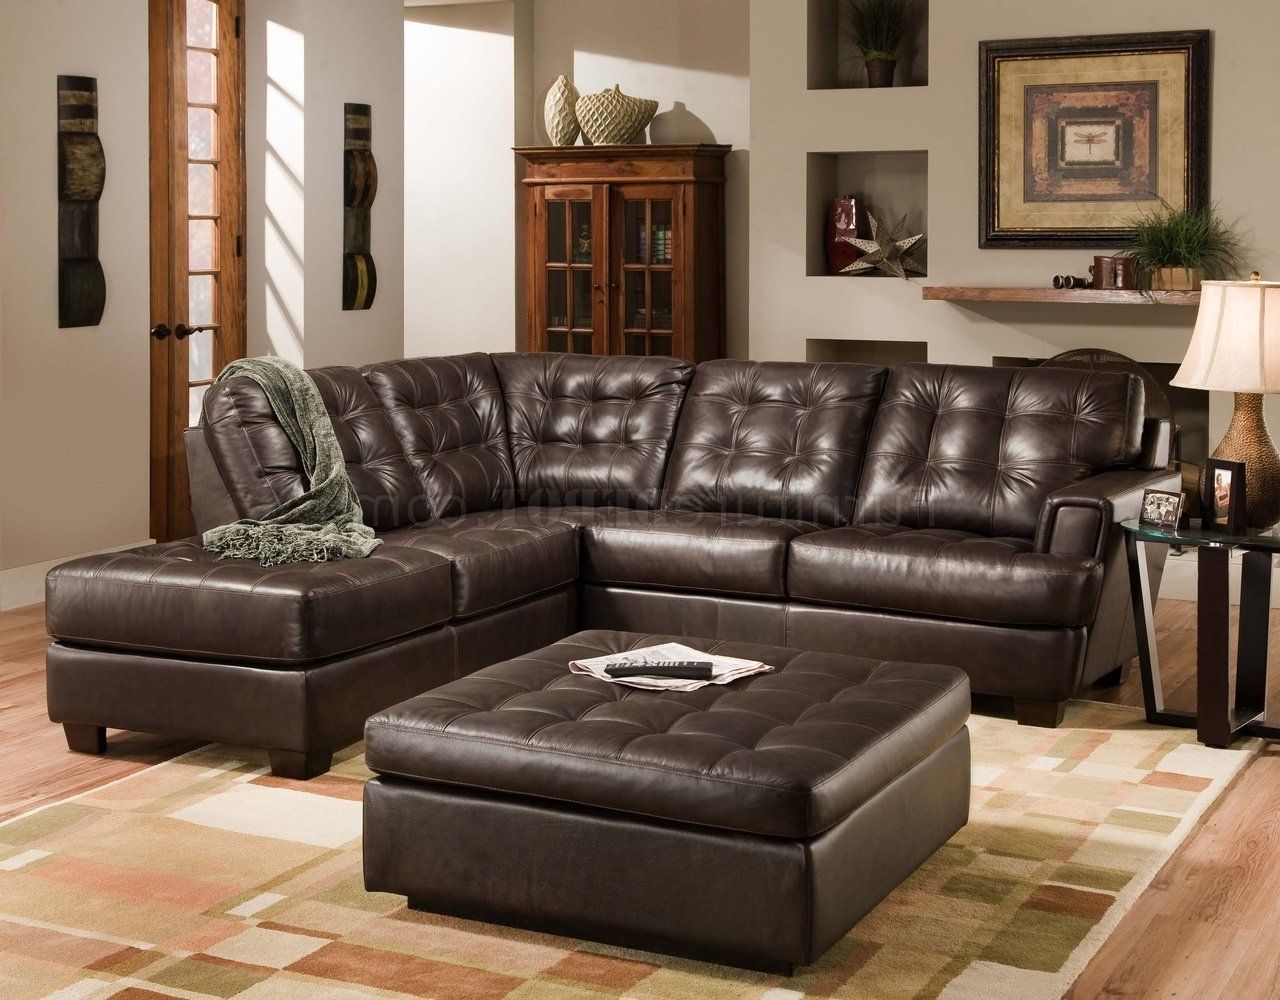 Sofa : Tufted Leather Couches Rolled Arm Leather Sofa Tufted For Best And Newest Tufted Sectional Sofas With Chaise (View 14 of 20)